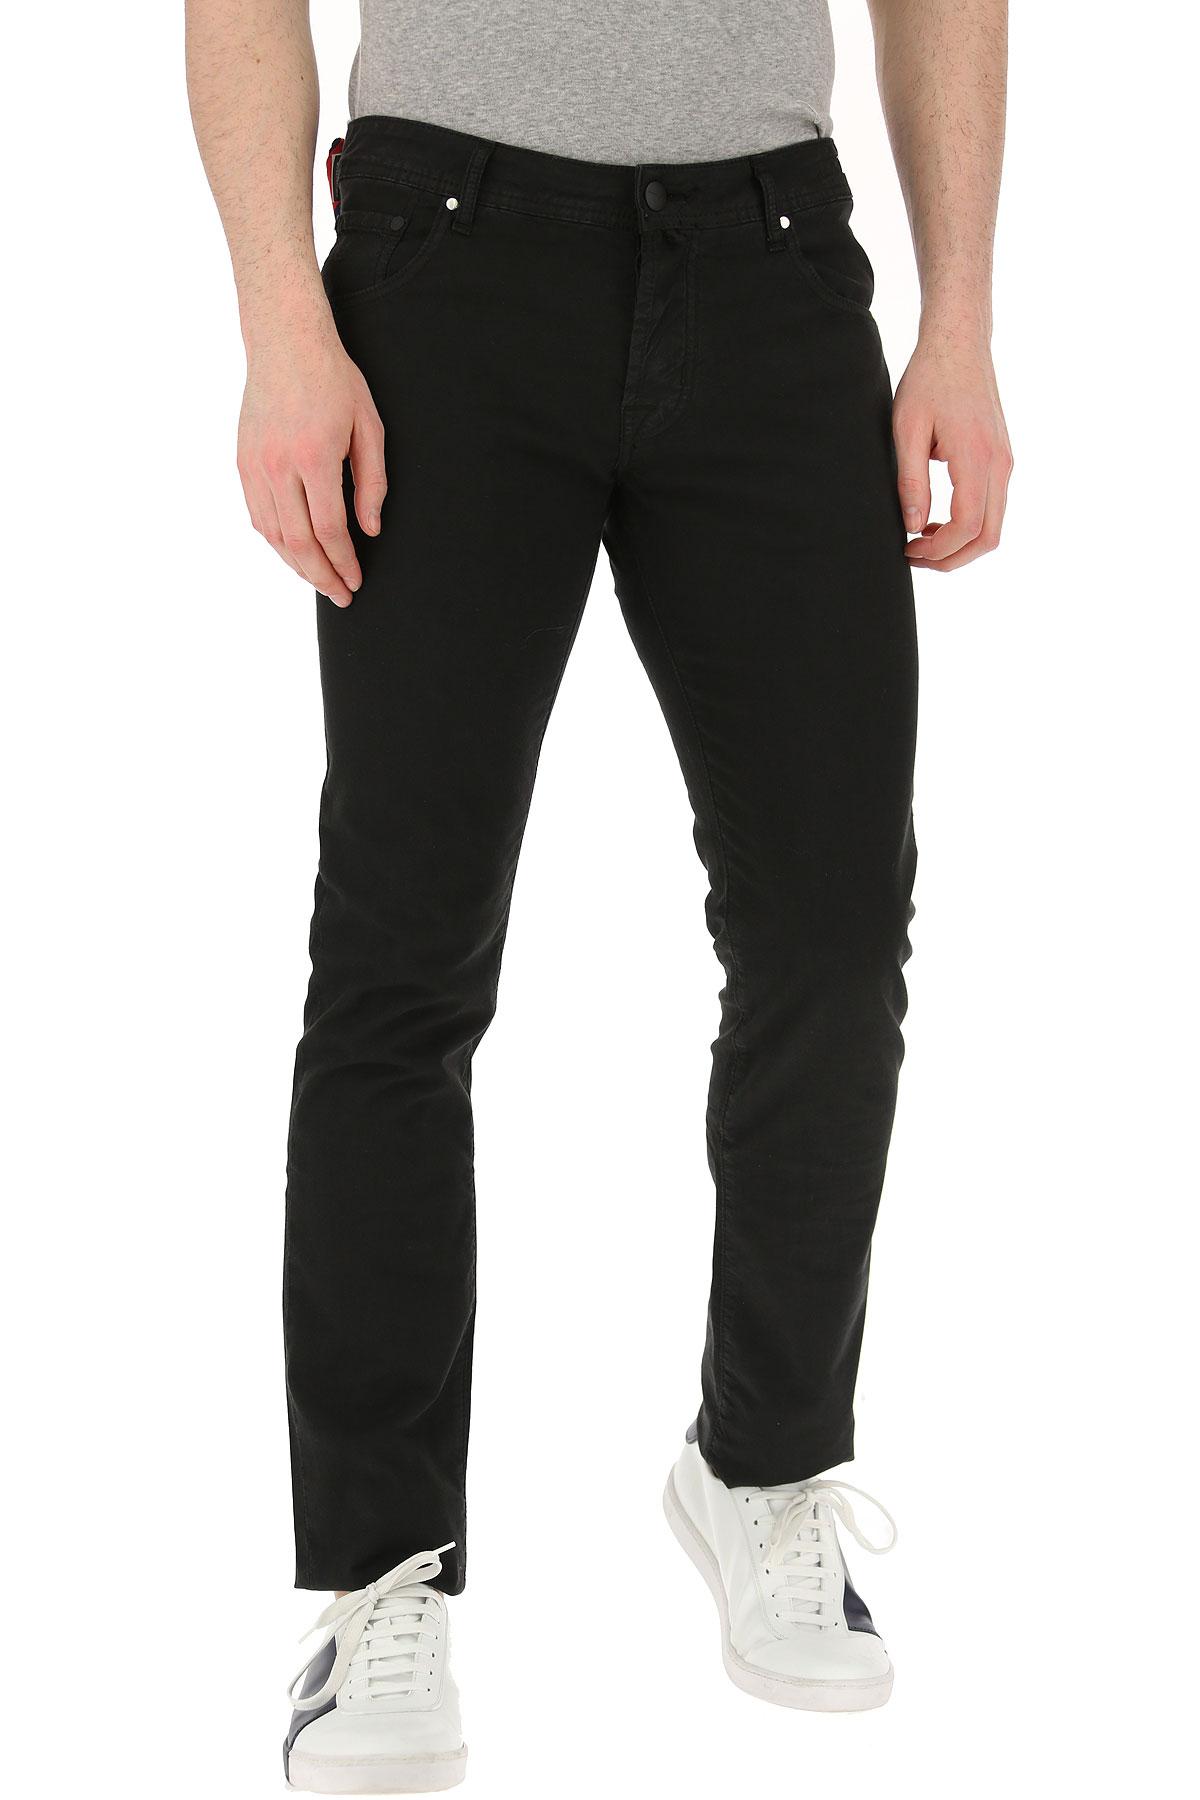 Jacob Cohen Synthetic Jeans On Sale in Black for Men - Lyst